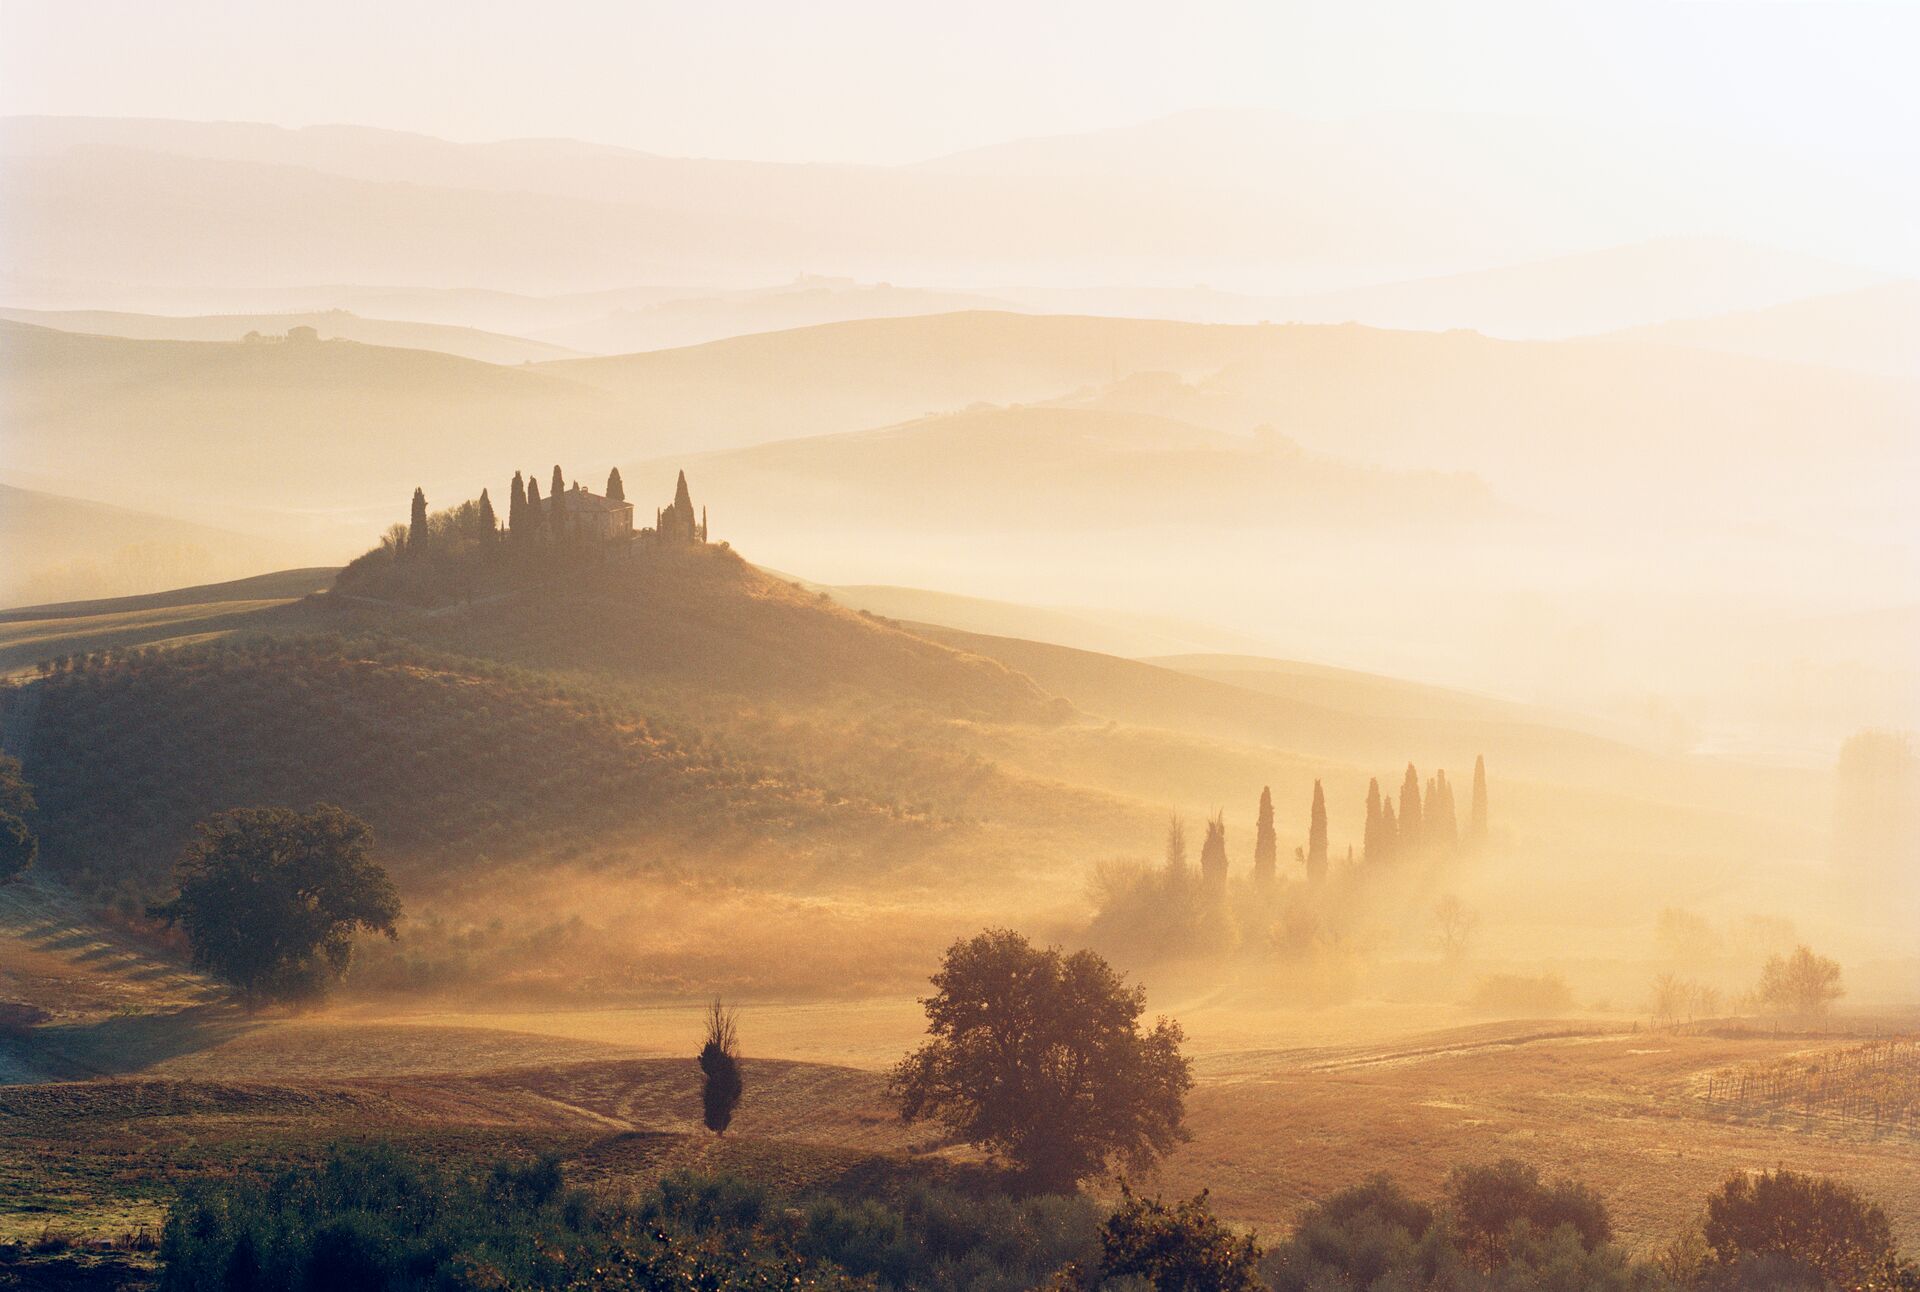 Image of Tuscan house on hilltop in the morning sunrise and mist, with a warm orange gloww